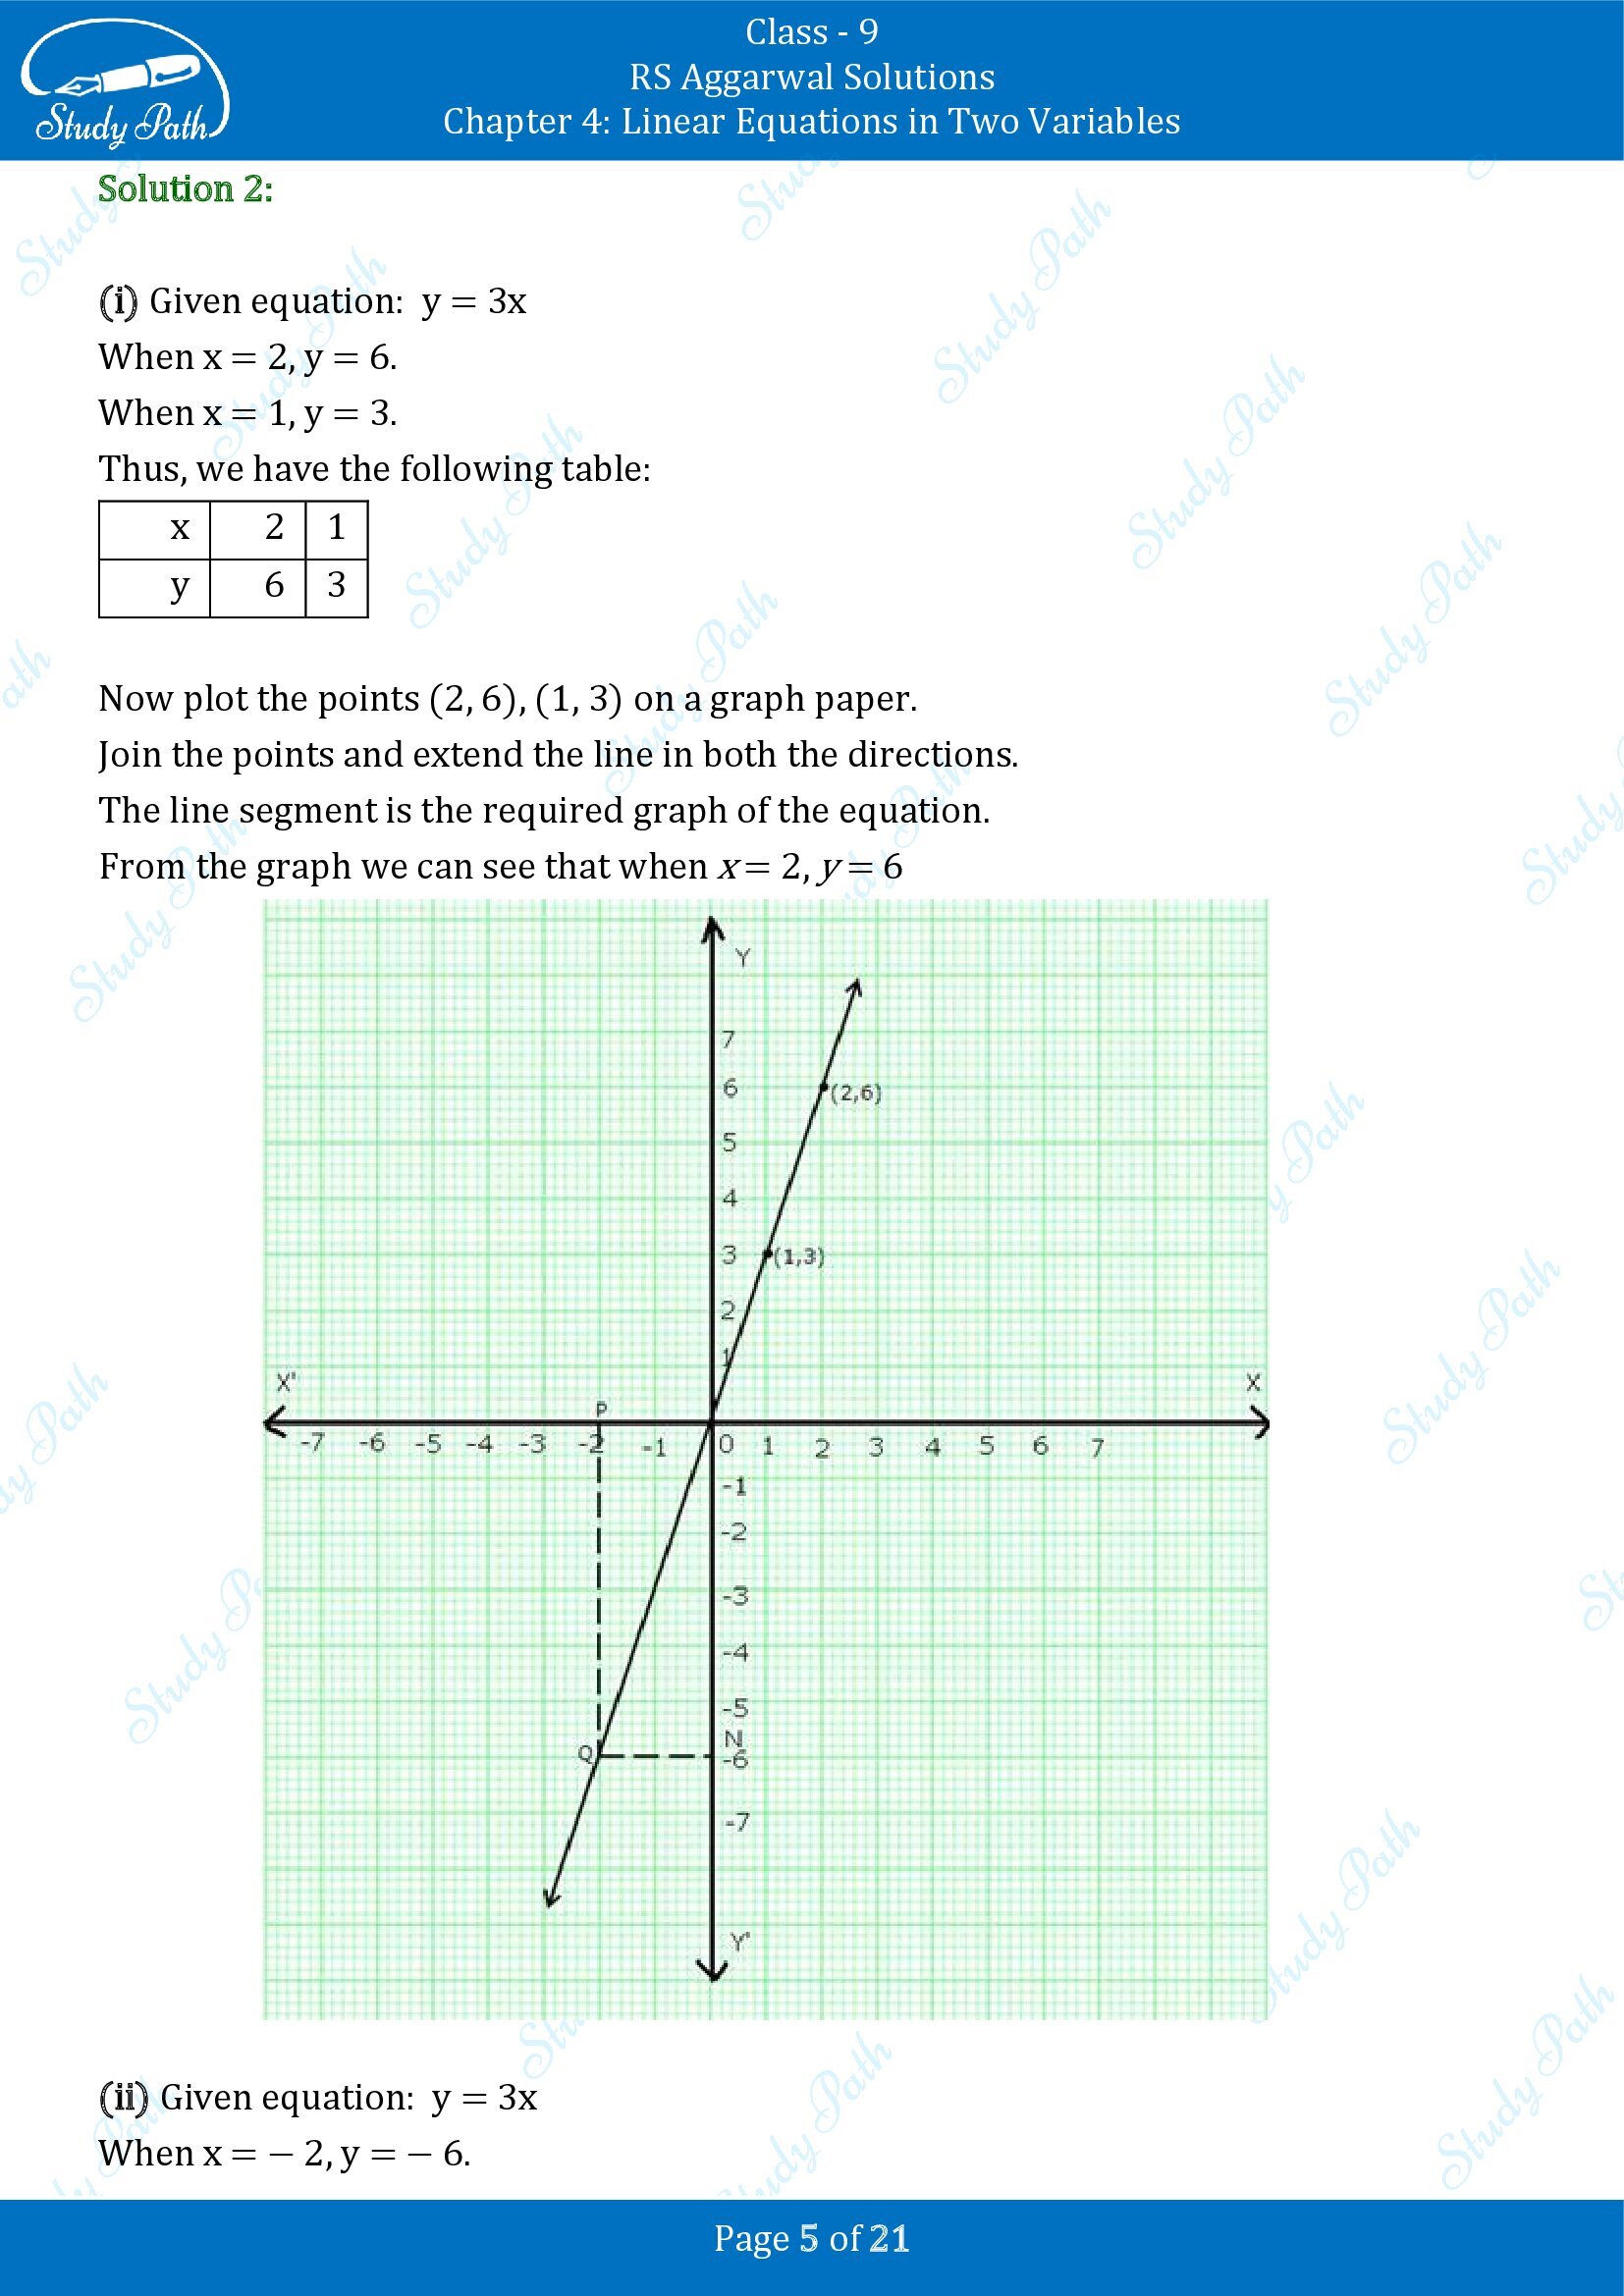 RS Aggarwal Solutions Class 9 Chapter 4 Linear Equations in Two Variables Exercise 4B 00005